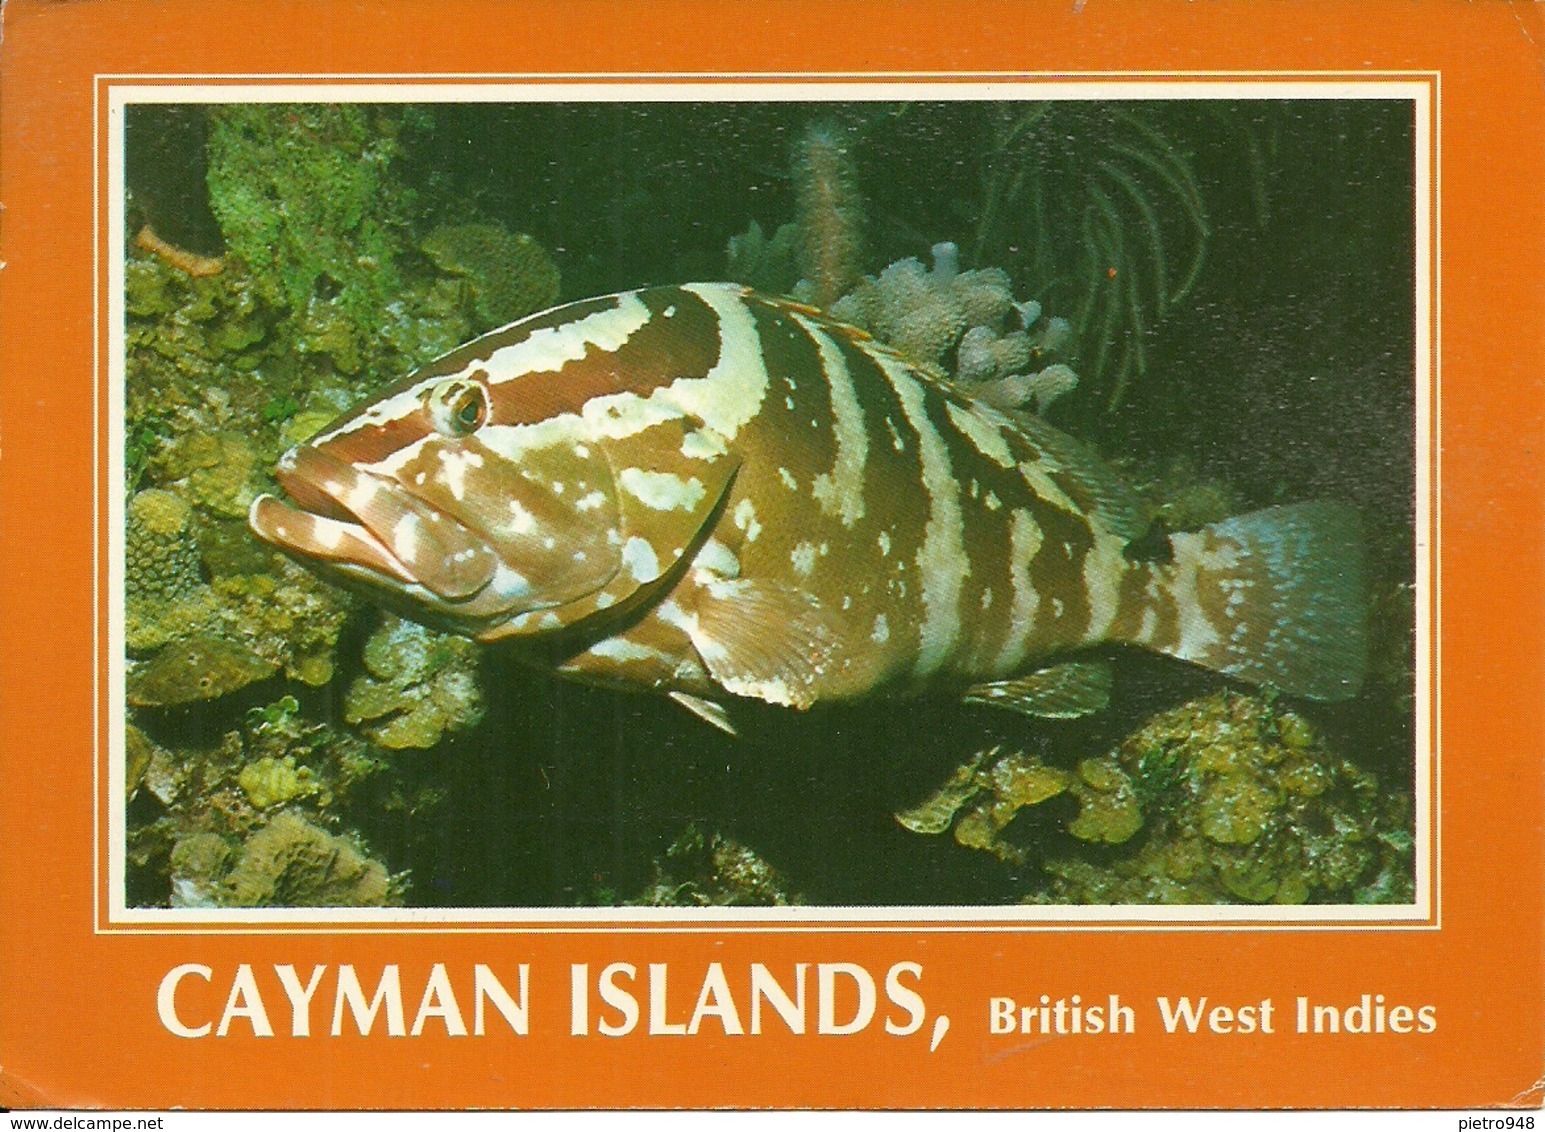 Cayman Islands (BWI, British West Indies) The Grouper Fish, Il Pesce Grouper - Caimán (Islas)